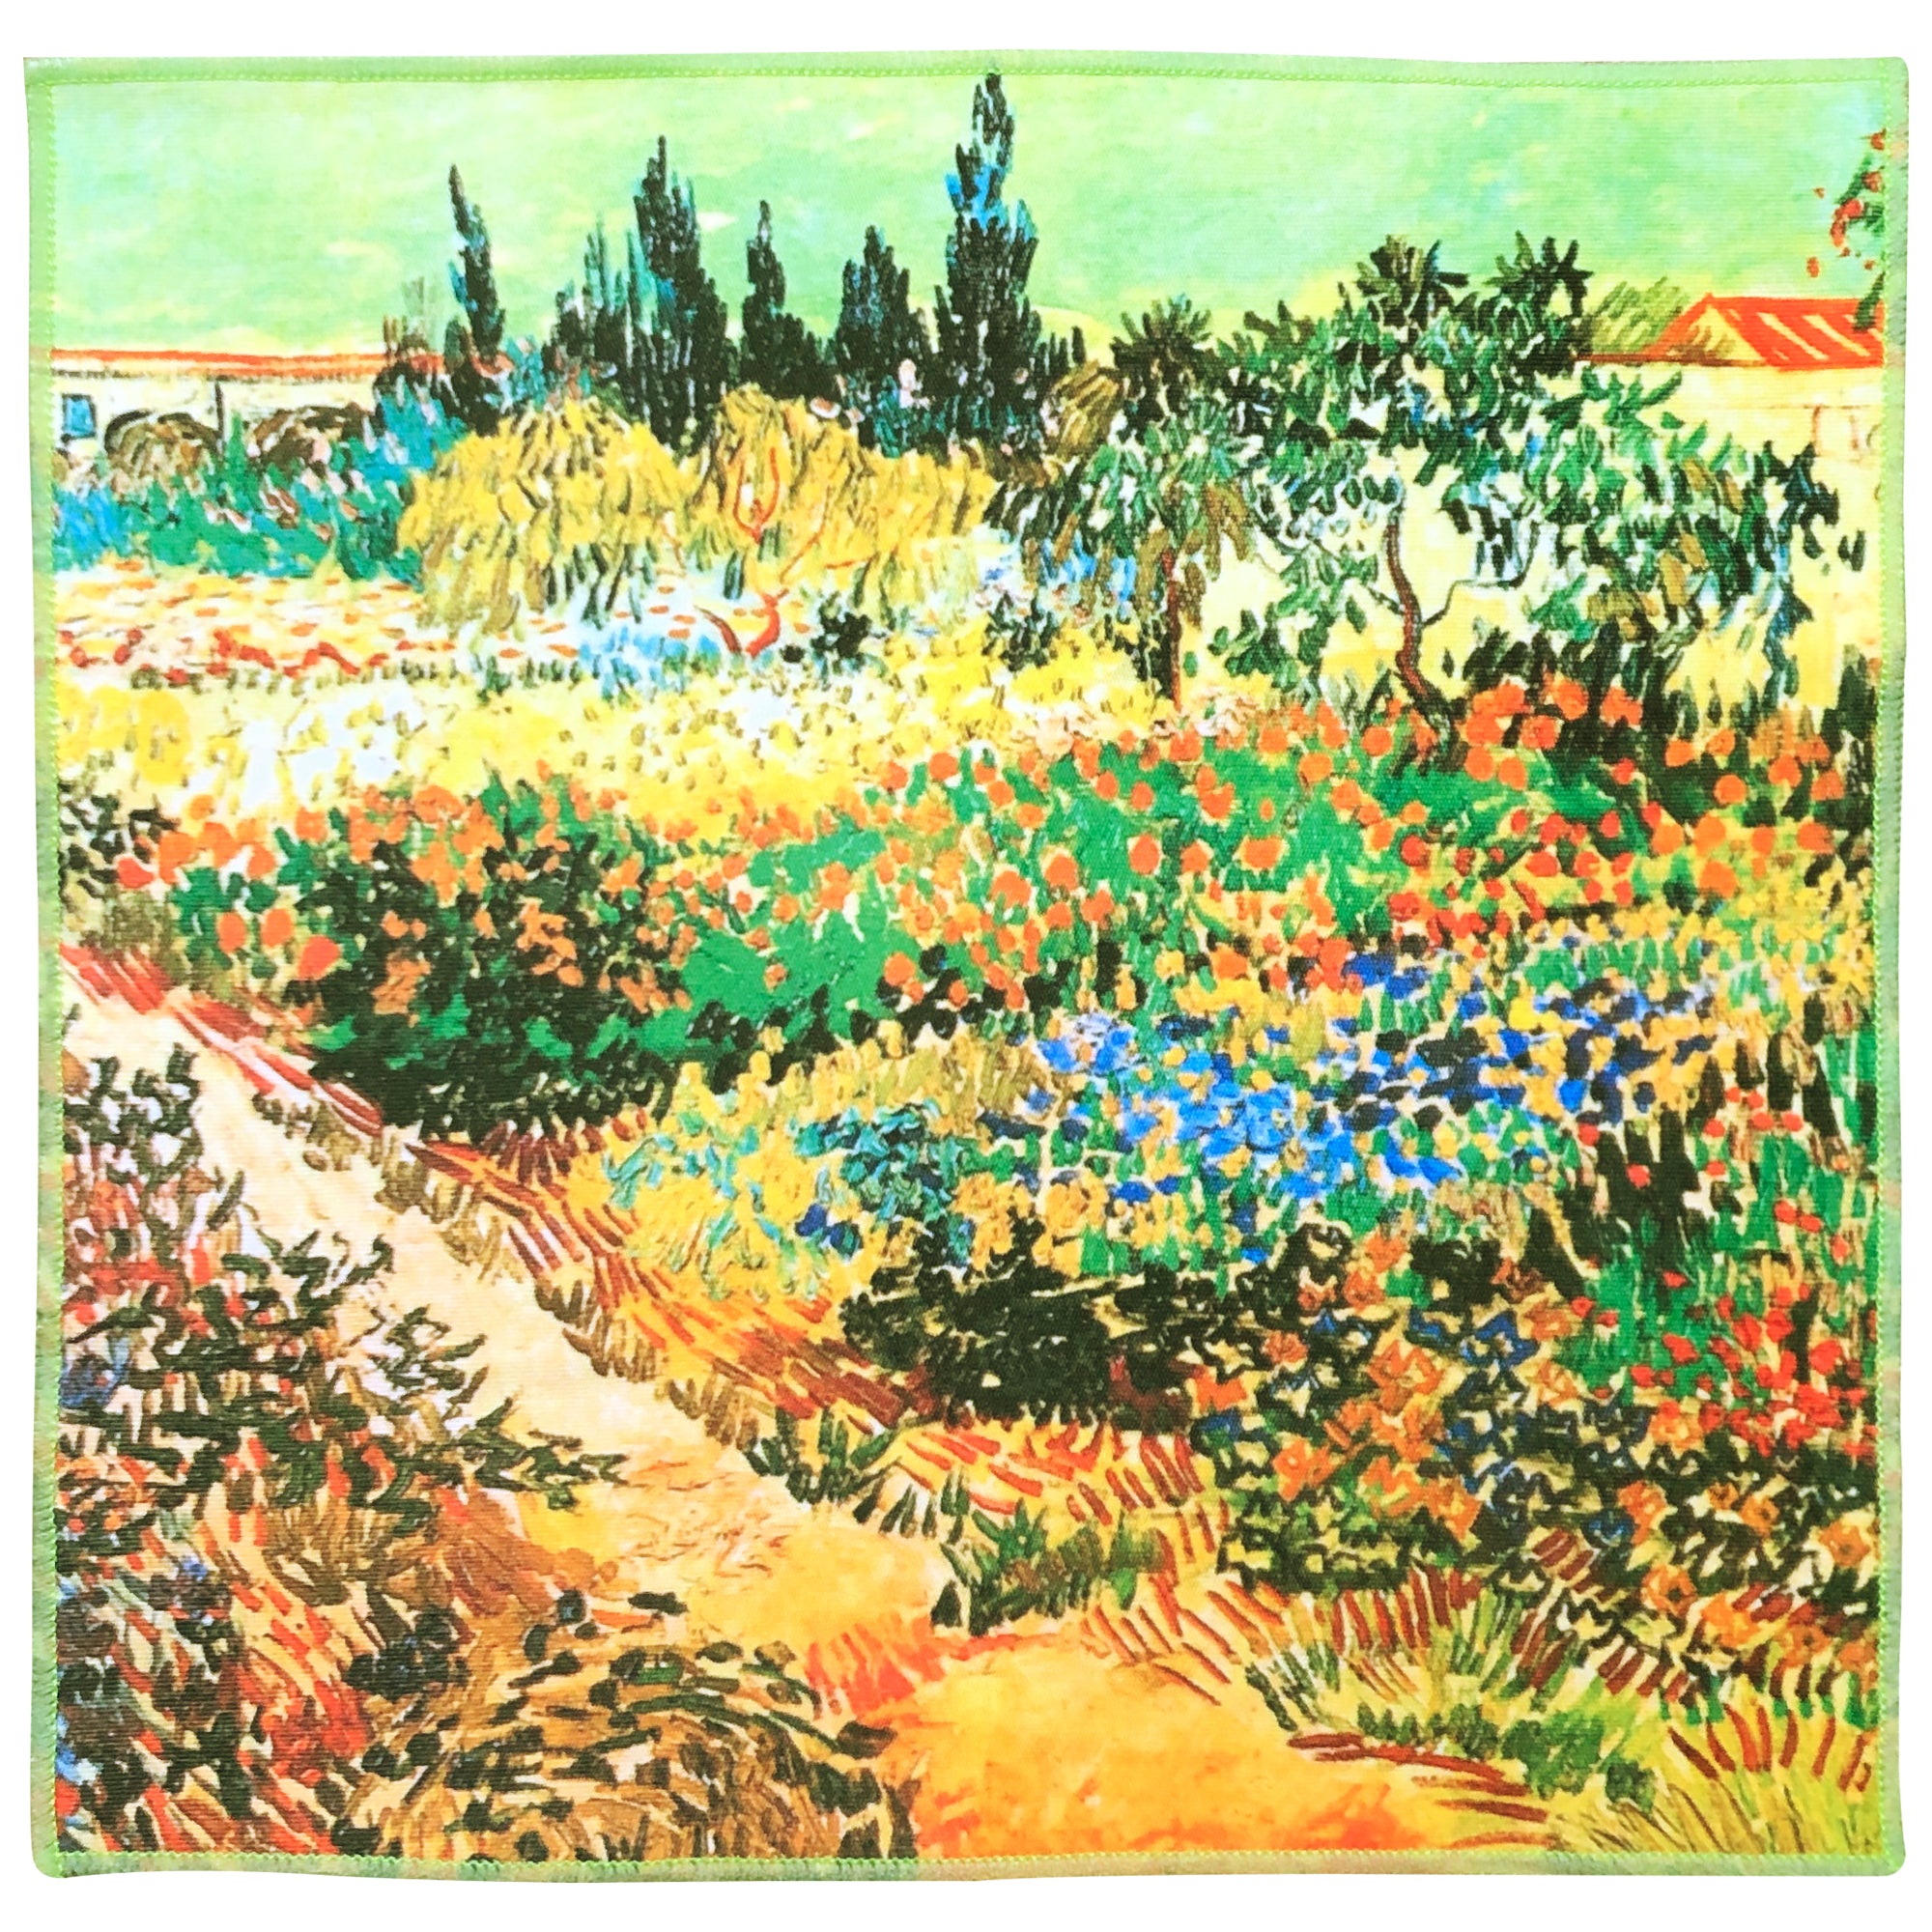 [6 Pack] Vincent Van Gogh "The Garden at Arles" - Art Collection - Ultra Premium Quality Microfiber Cleaning Cloths